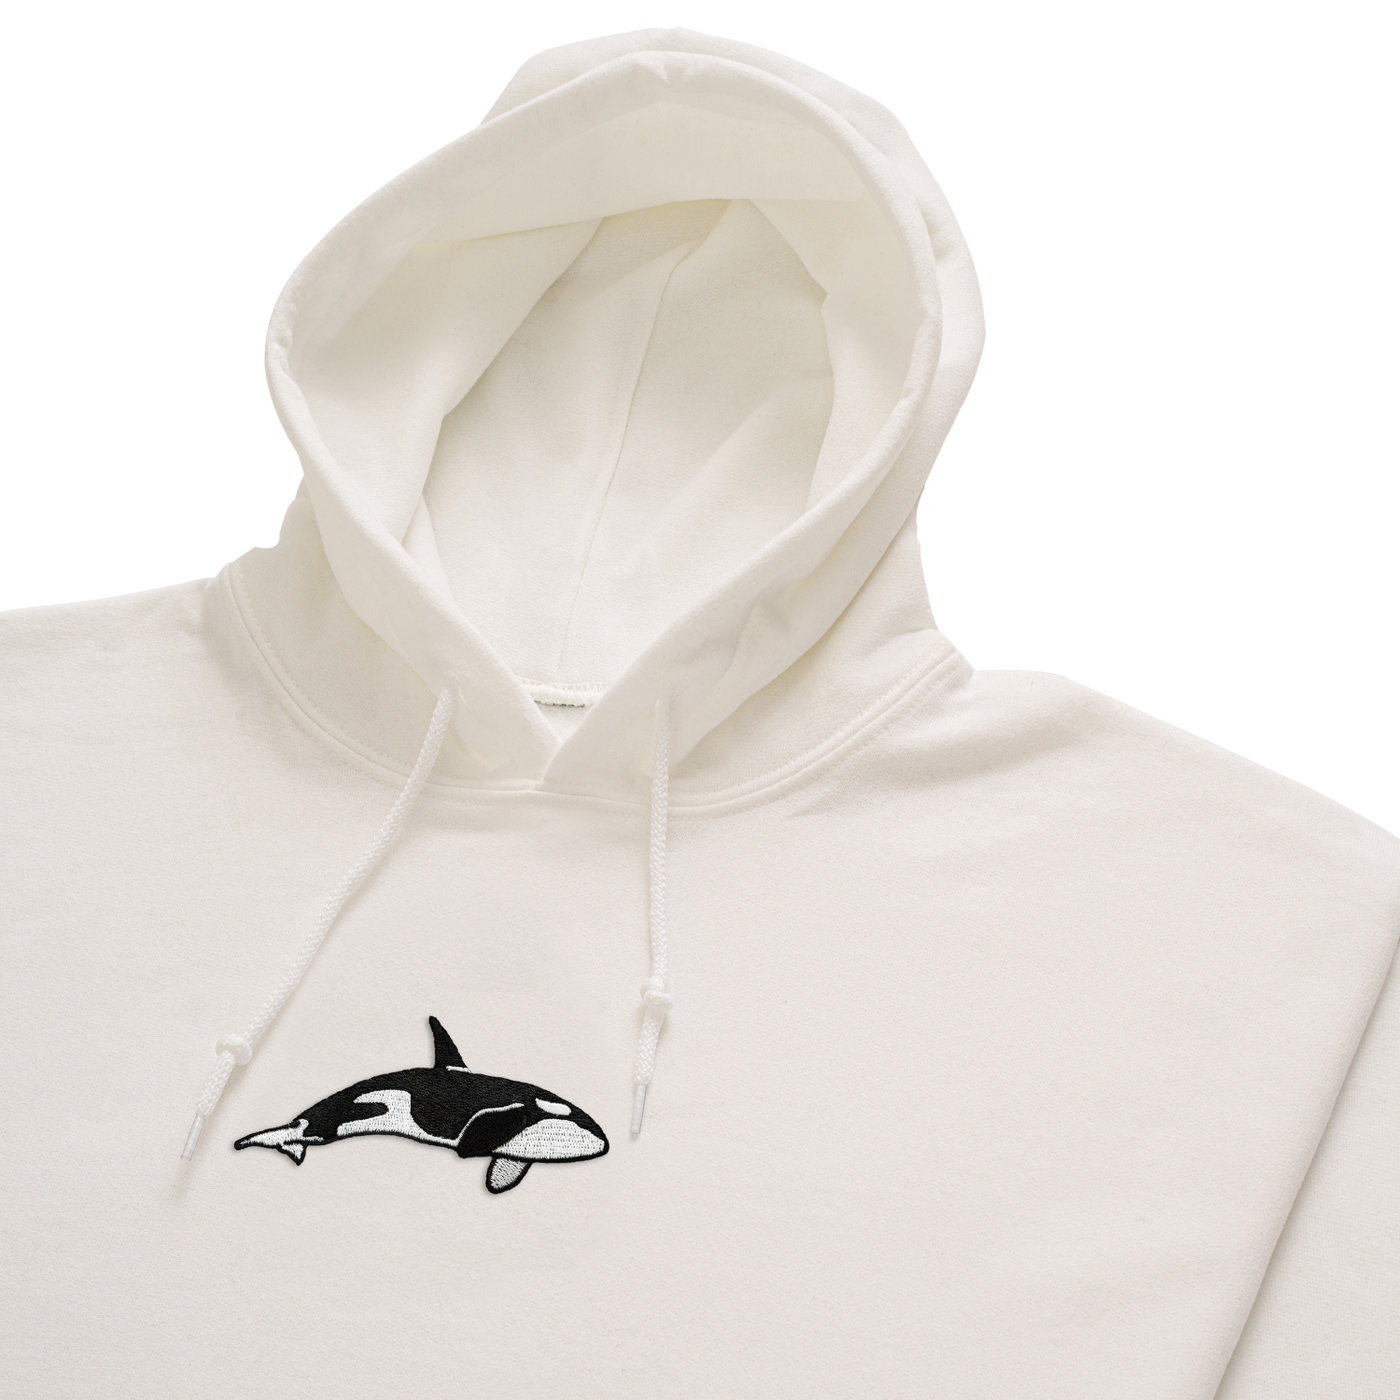 Bobby's Planet Men's Embroidered Orca Hoodie from Seven Seas Fish Animals Collection in White Color#color_white